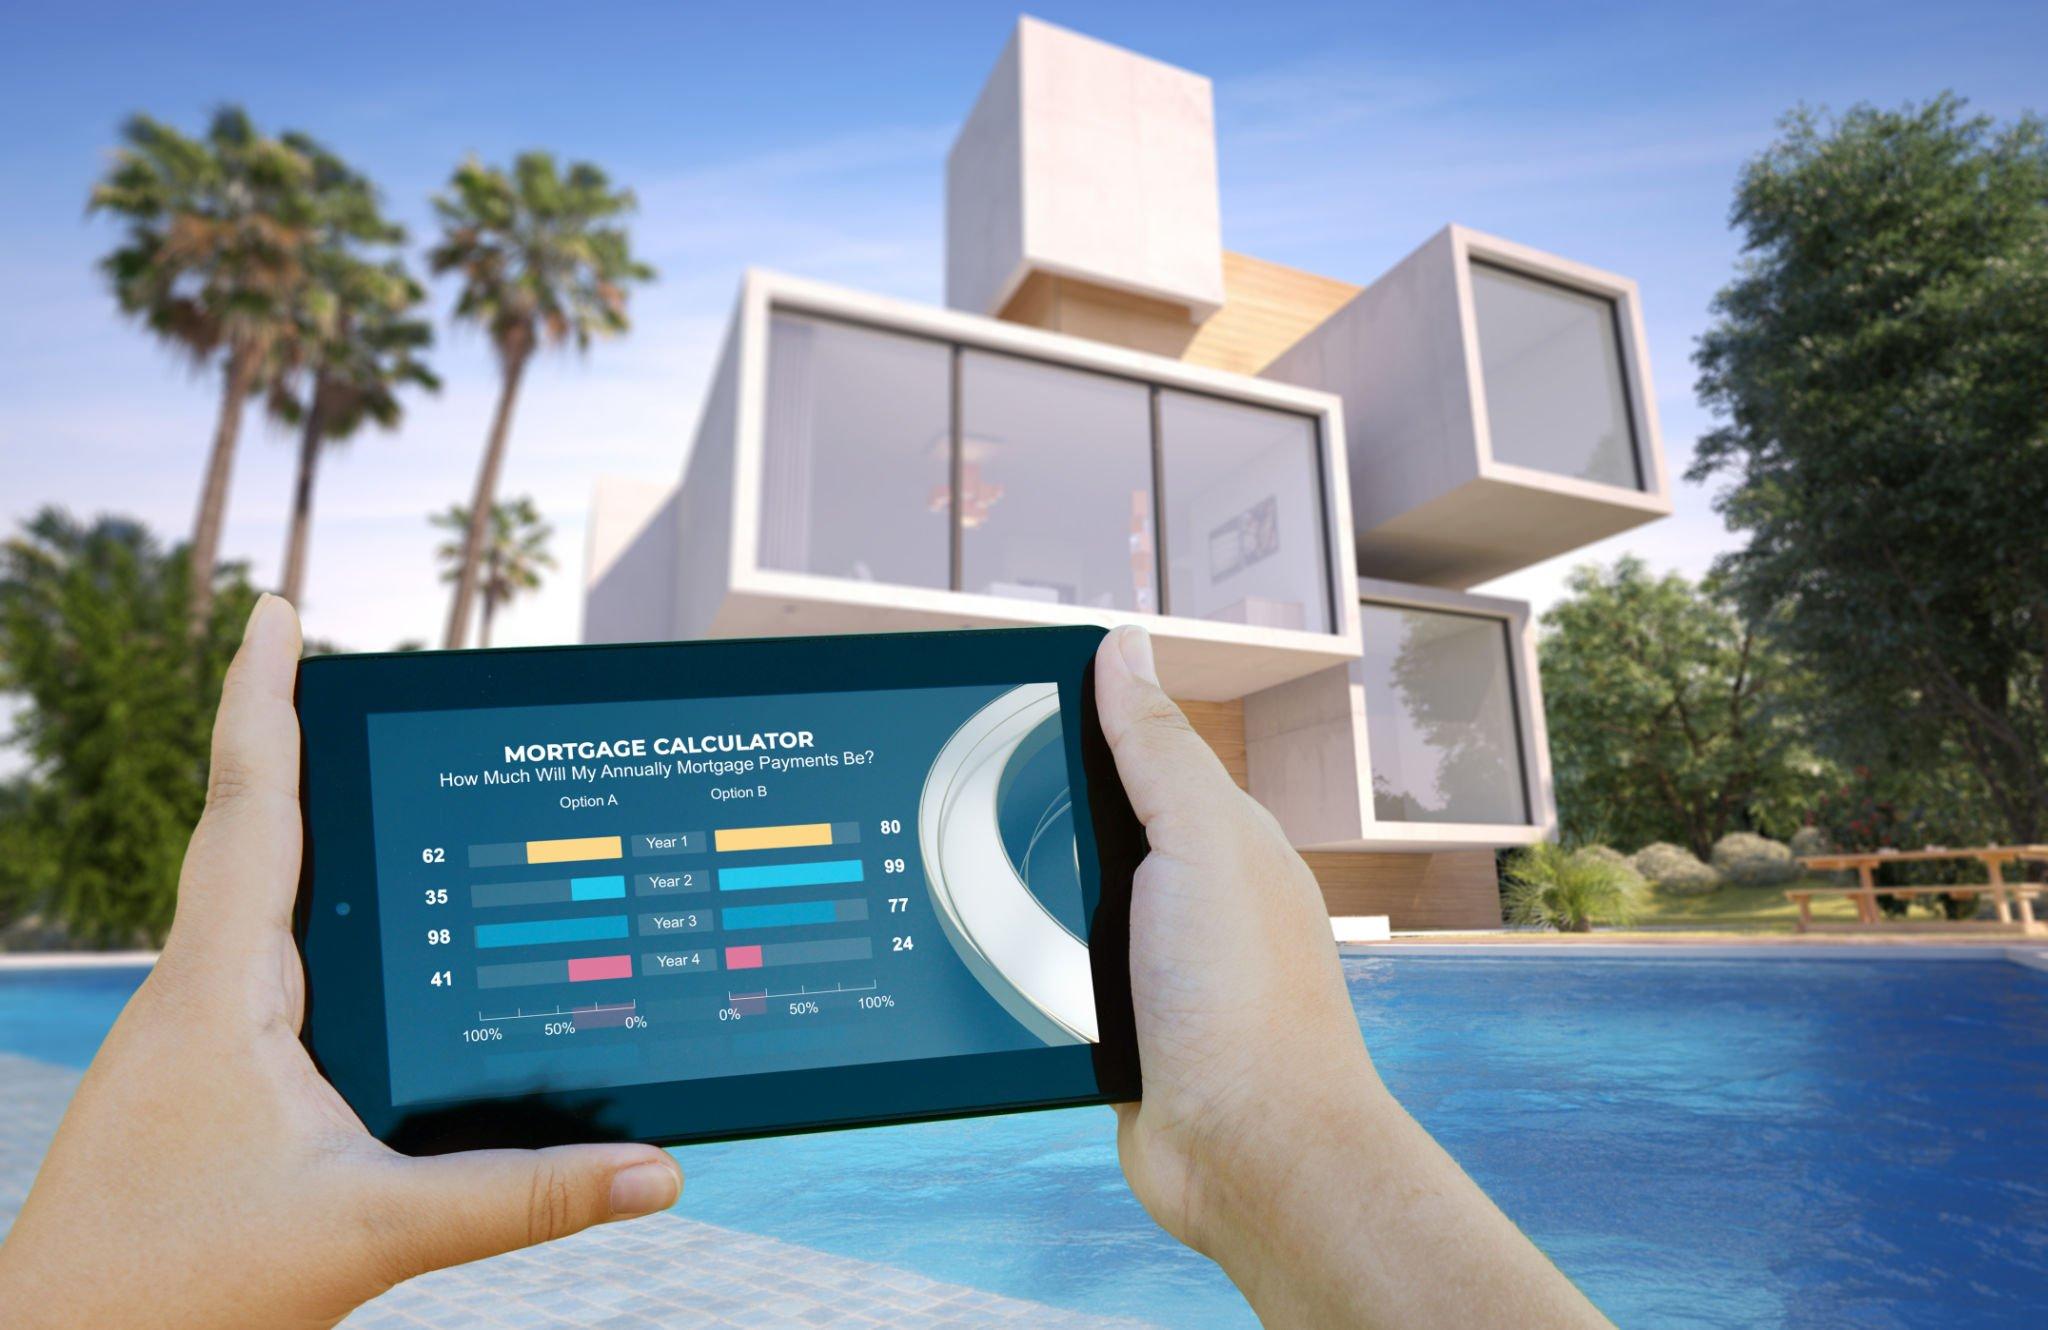 Intelligent Home Automation Industry